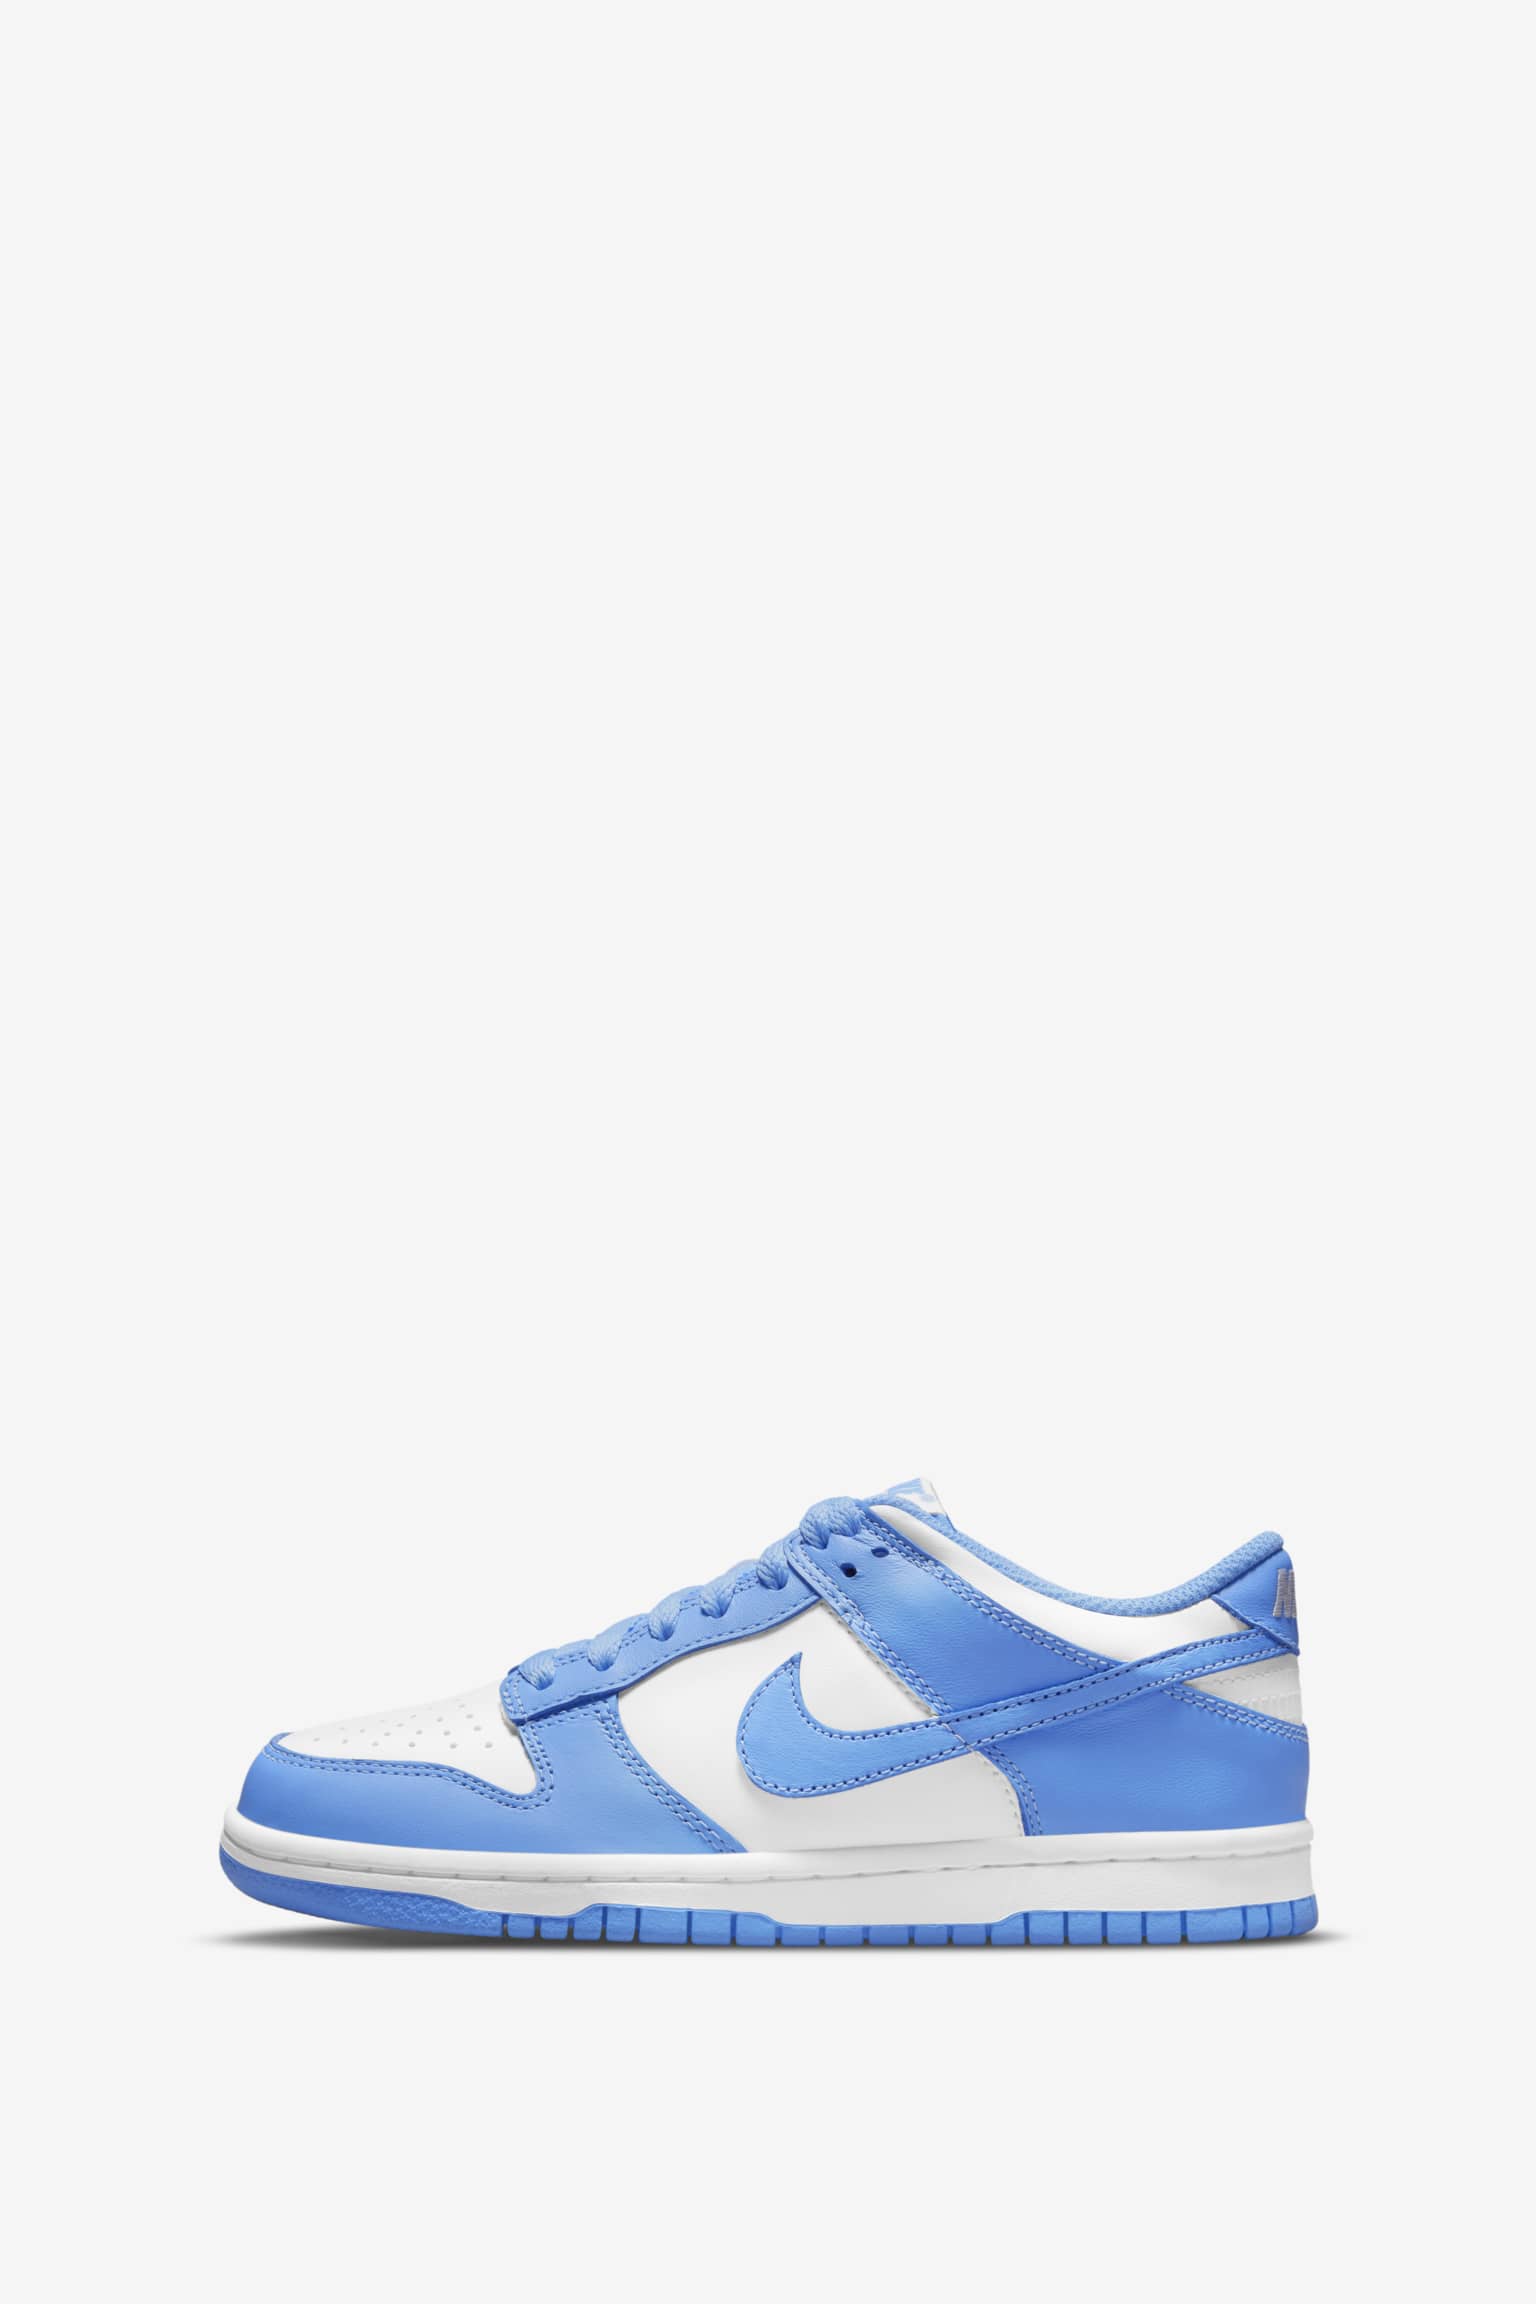 Dunk Low 'University Blue' Release Date. Nike SNKRS SG